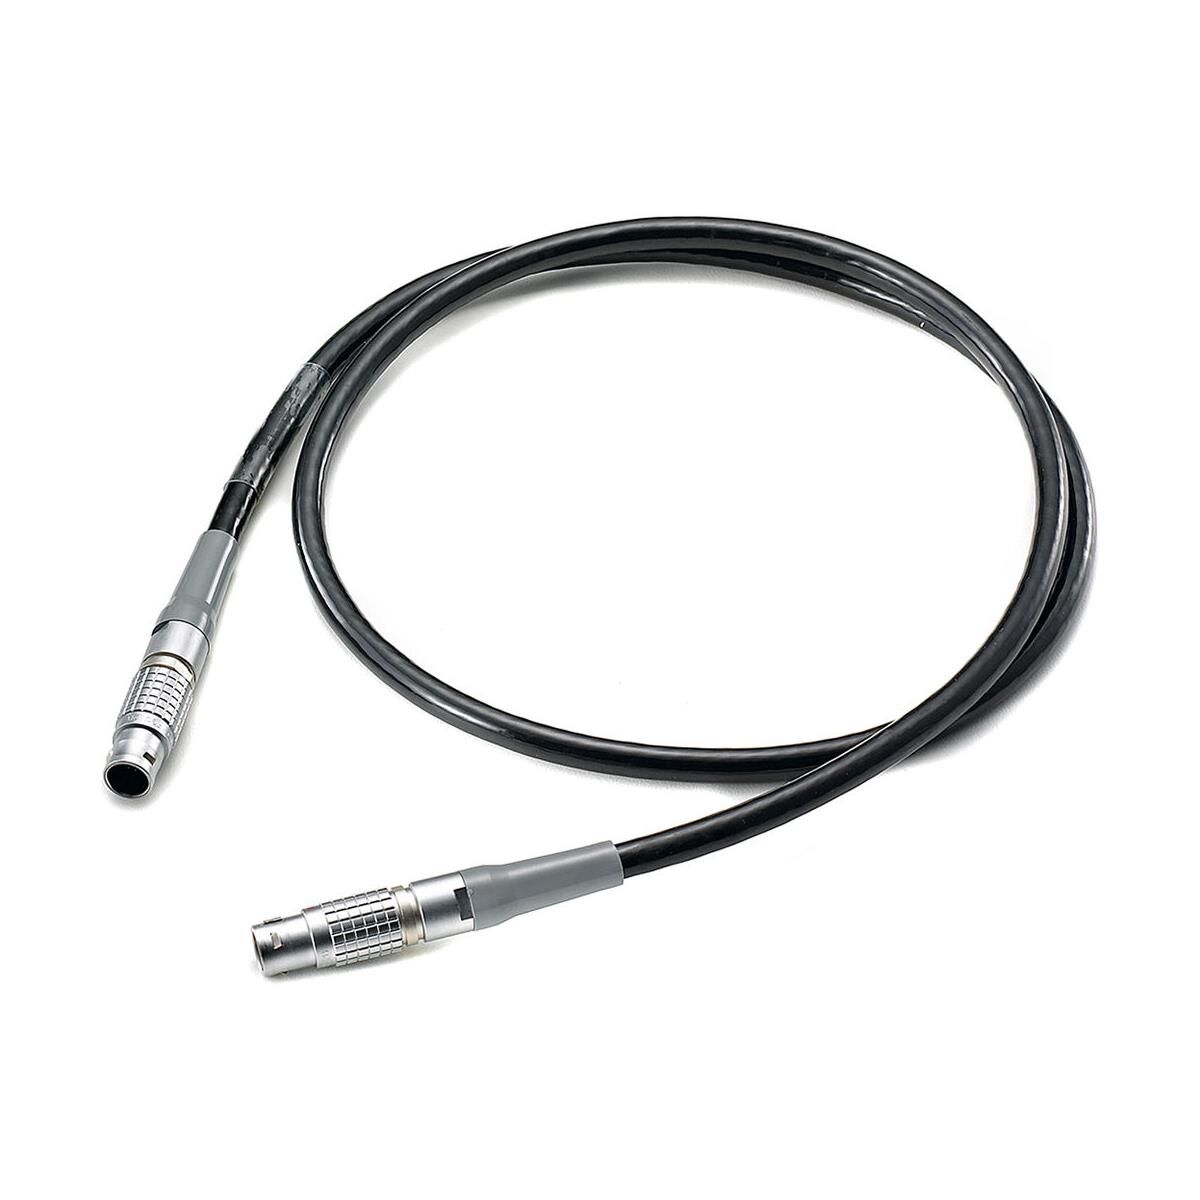 Anton Bauer Low Cost Charge Cable for CINE Series Batteries/Chargers